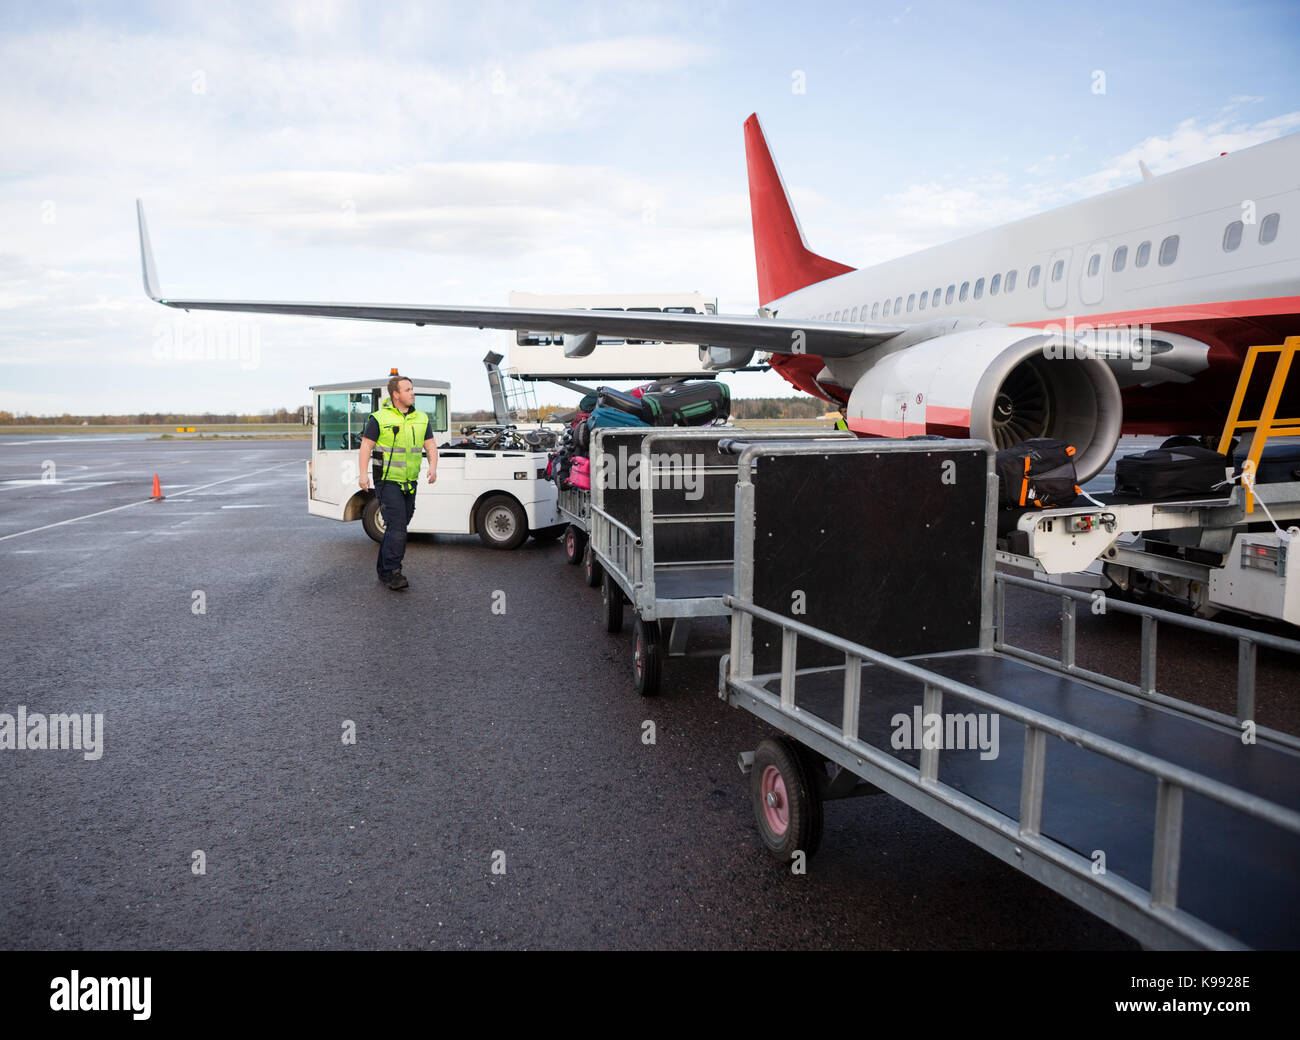 Worker Walking By Luggage Trailers On Runway Stock Photo